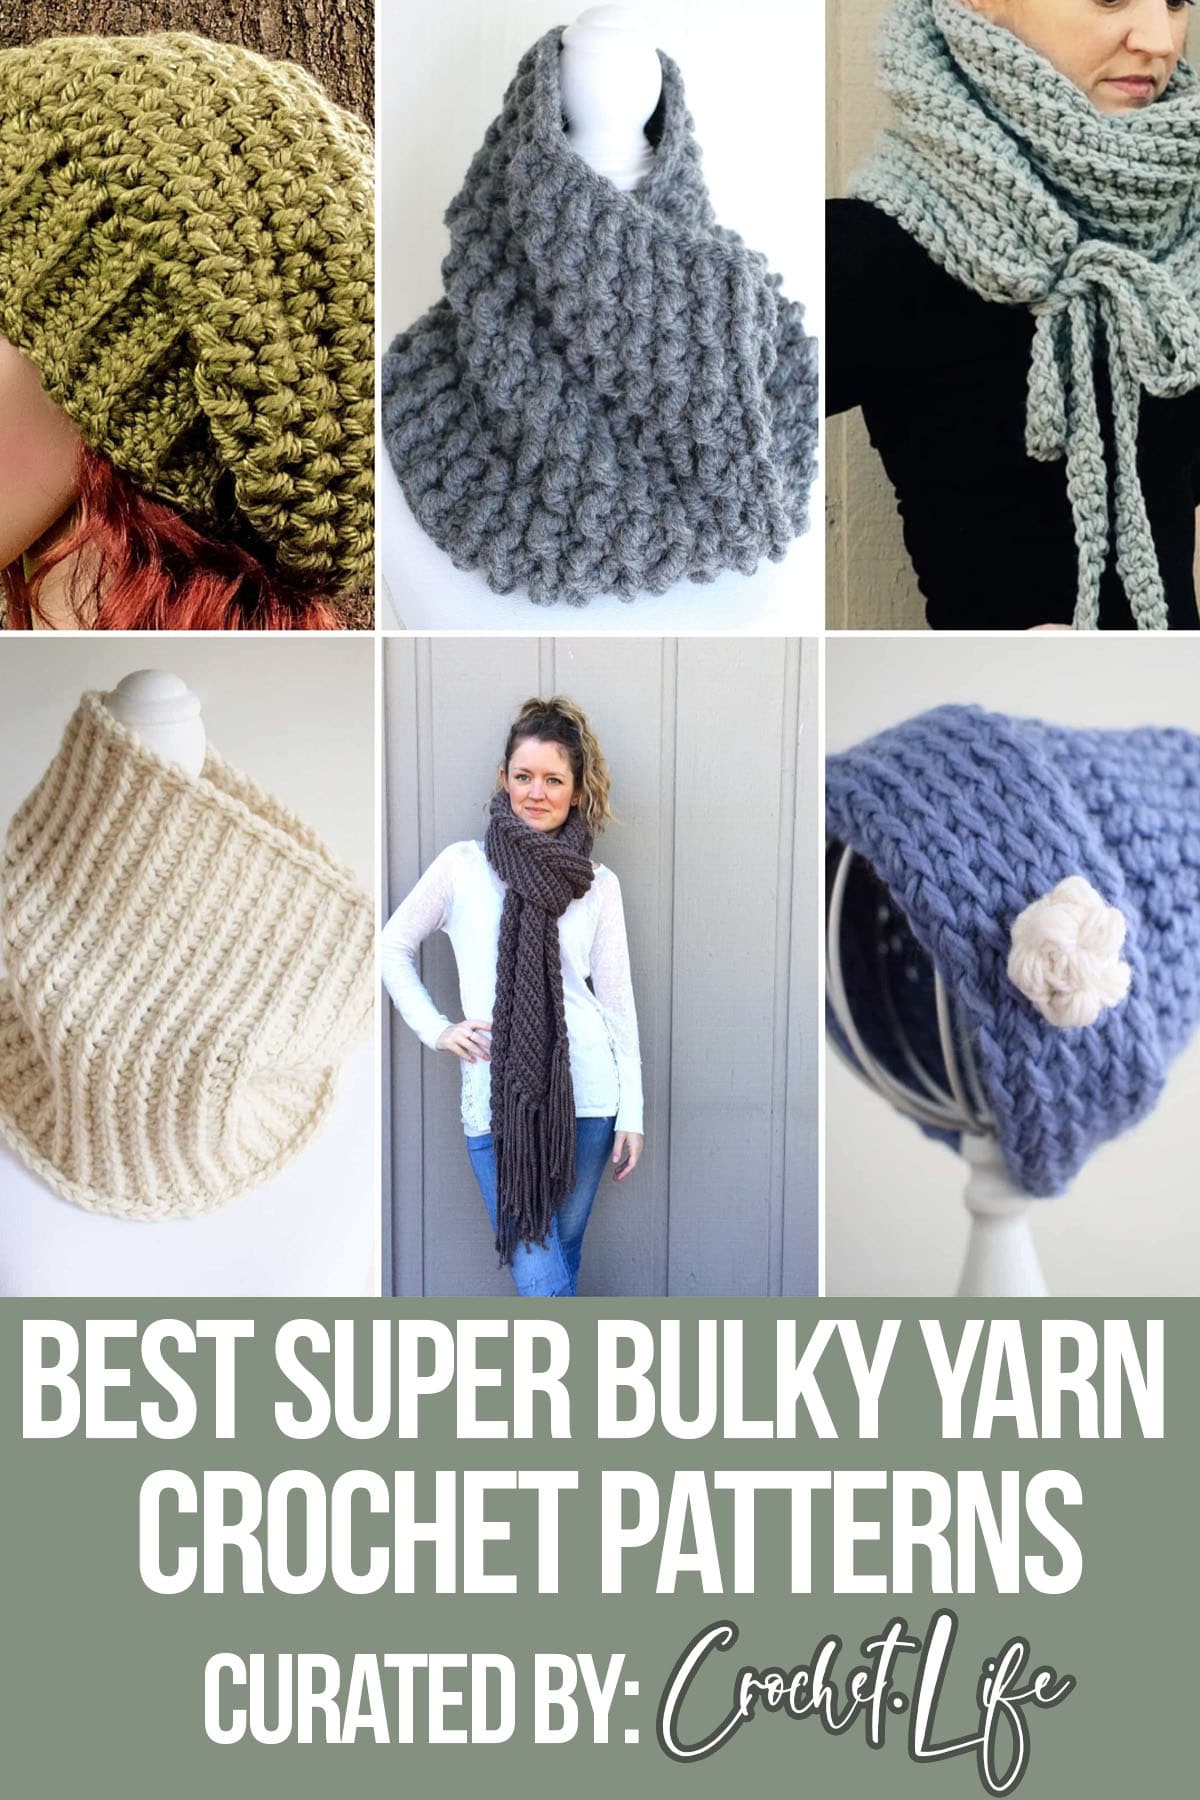 photo collage of super bulky yarn crochet patterns with text which reads best super bulky yarn crochet patterns curated by crochet.life